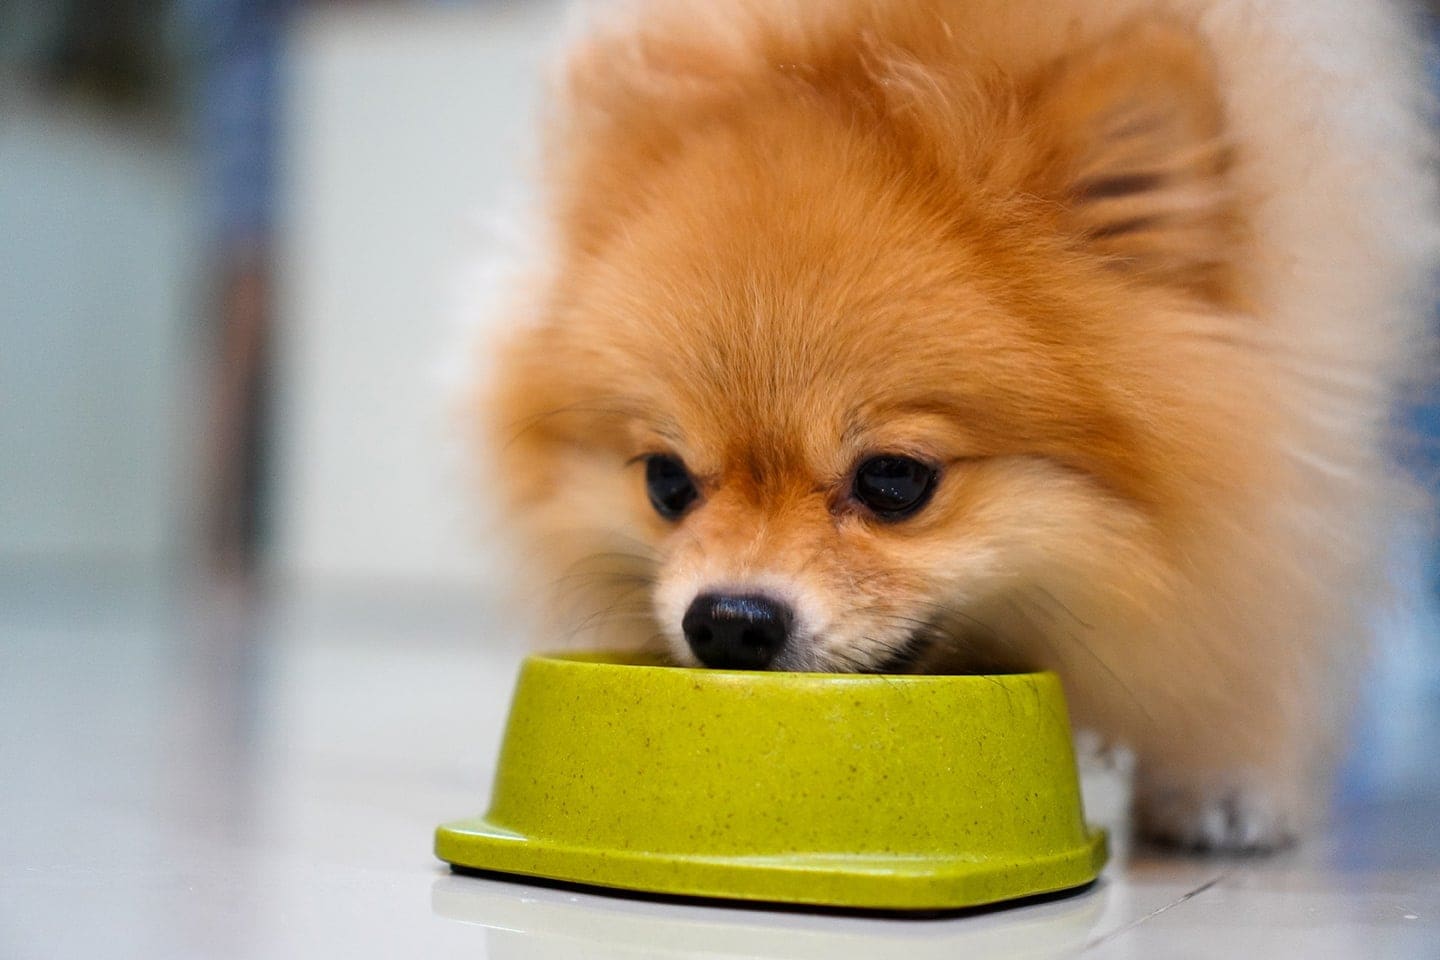 8 Best Dog Foods for Pomeranians in 2022 - Reviews & Top ...